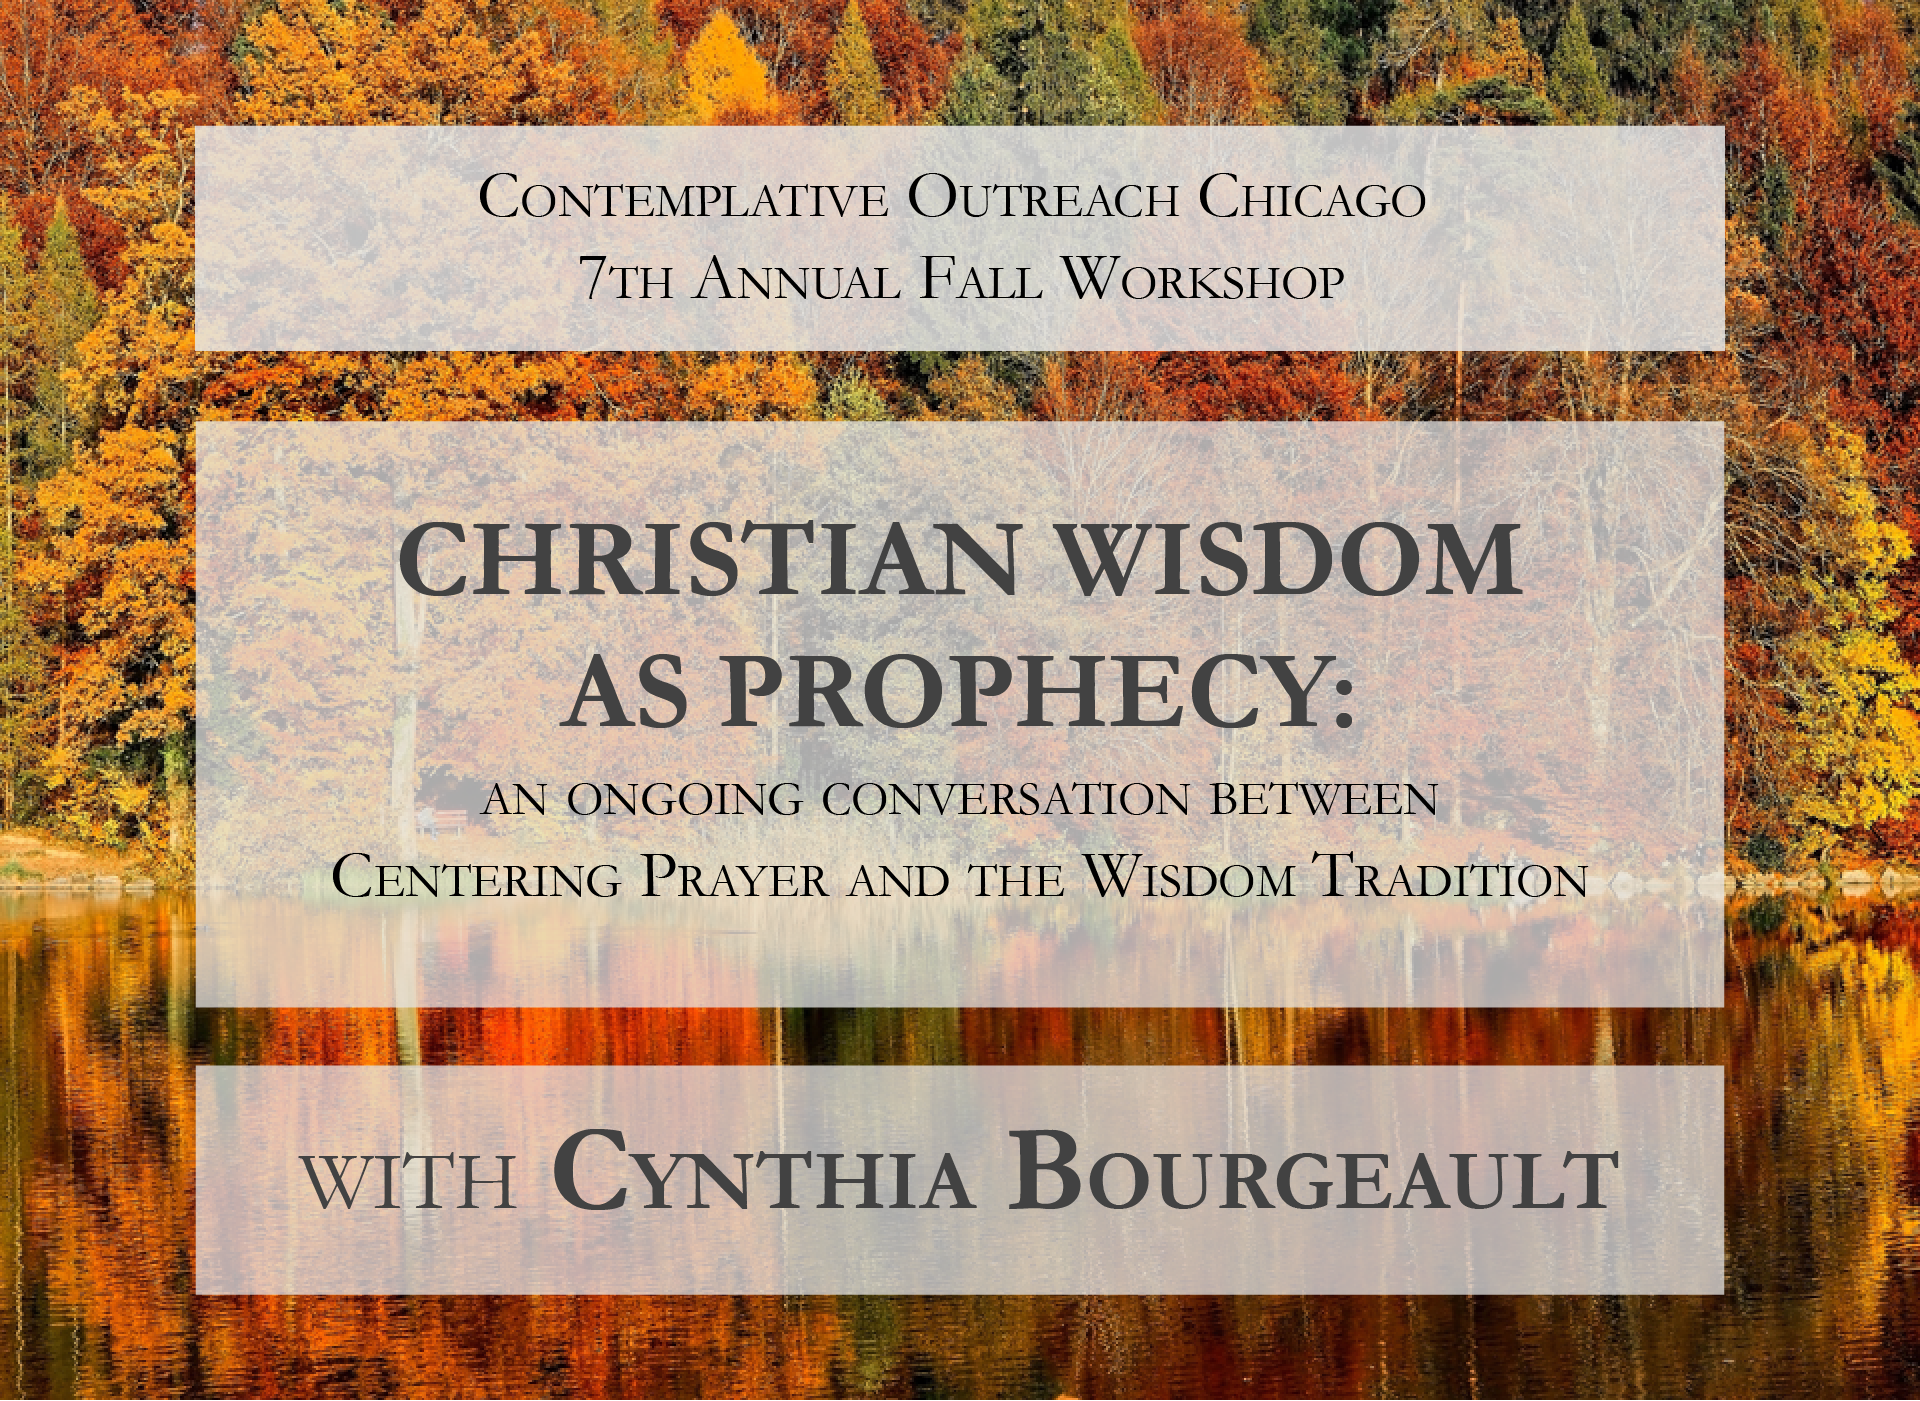 Contemplative Outreach Chicago, 7th annual fall workshop. Christian Wisdom as Prophecy: an ongoing conversation between Centering Prayer and the Wisdom Tradition. With Cynthia Bourgeault.